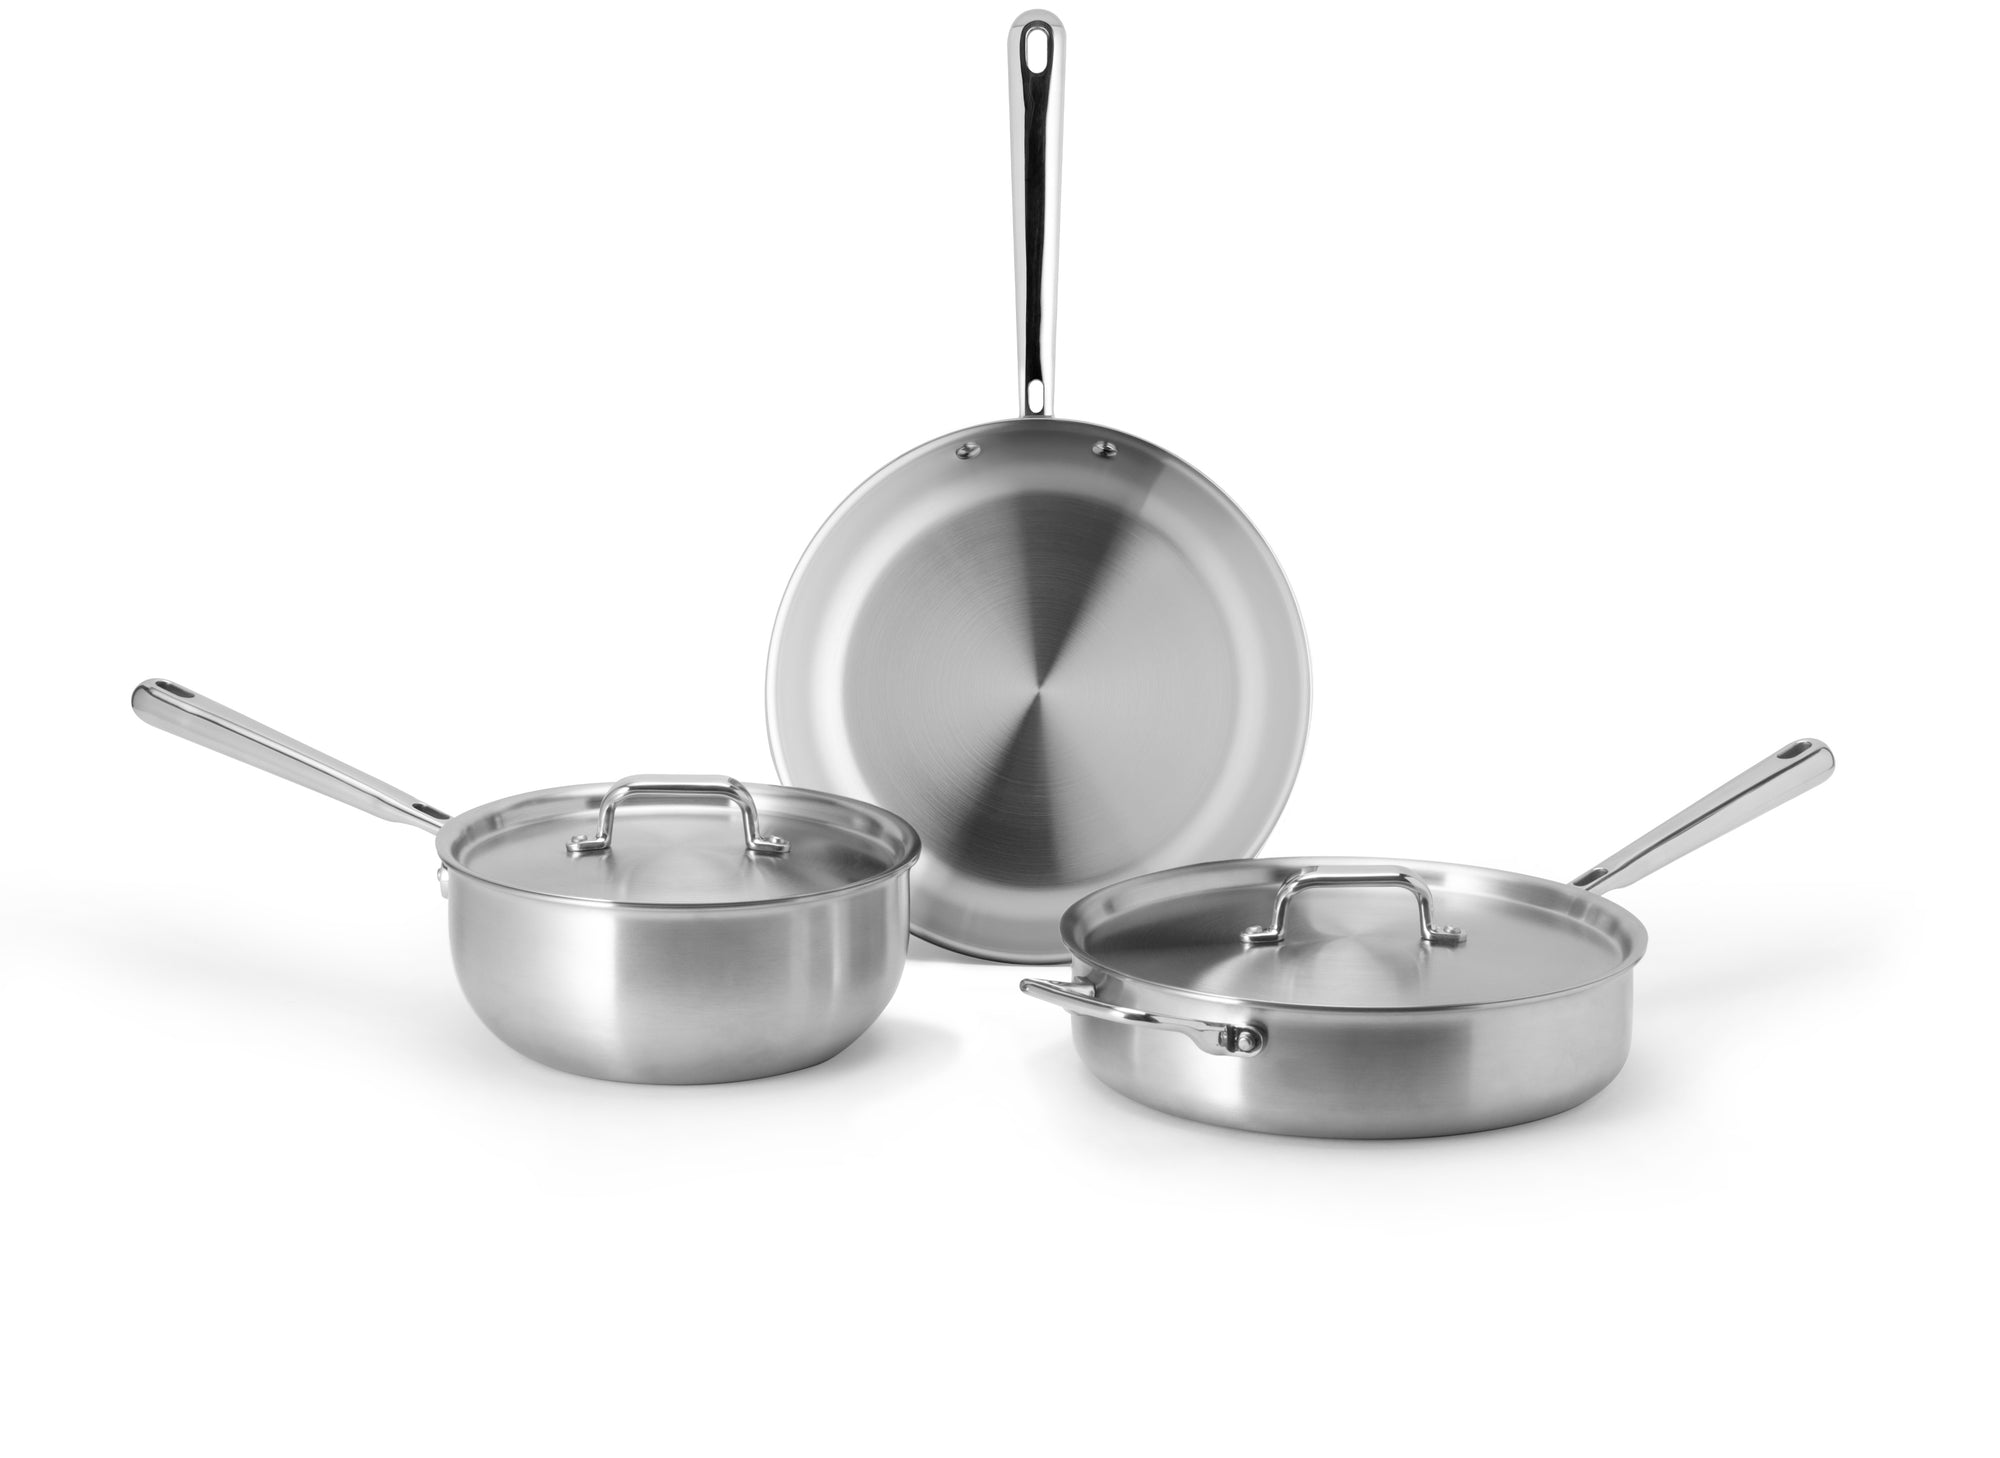 The Misen Starter Cookware Set includes a three quart saucier, a 10 inch stainless skillet and a three quart saute pan.